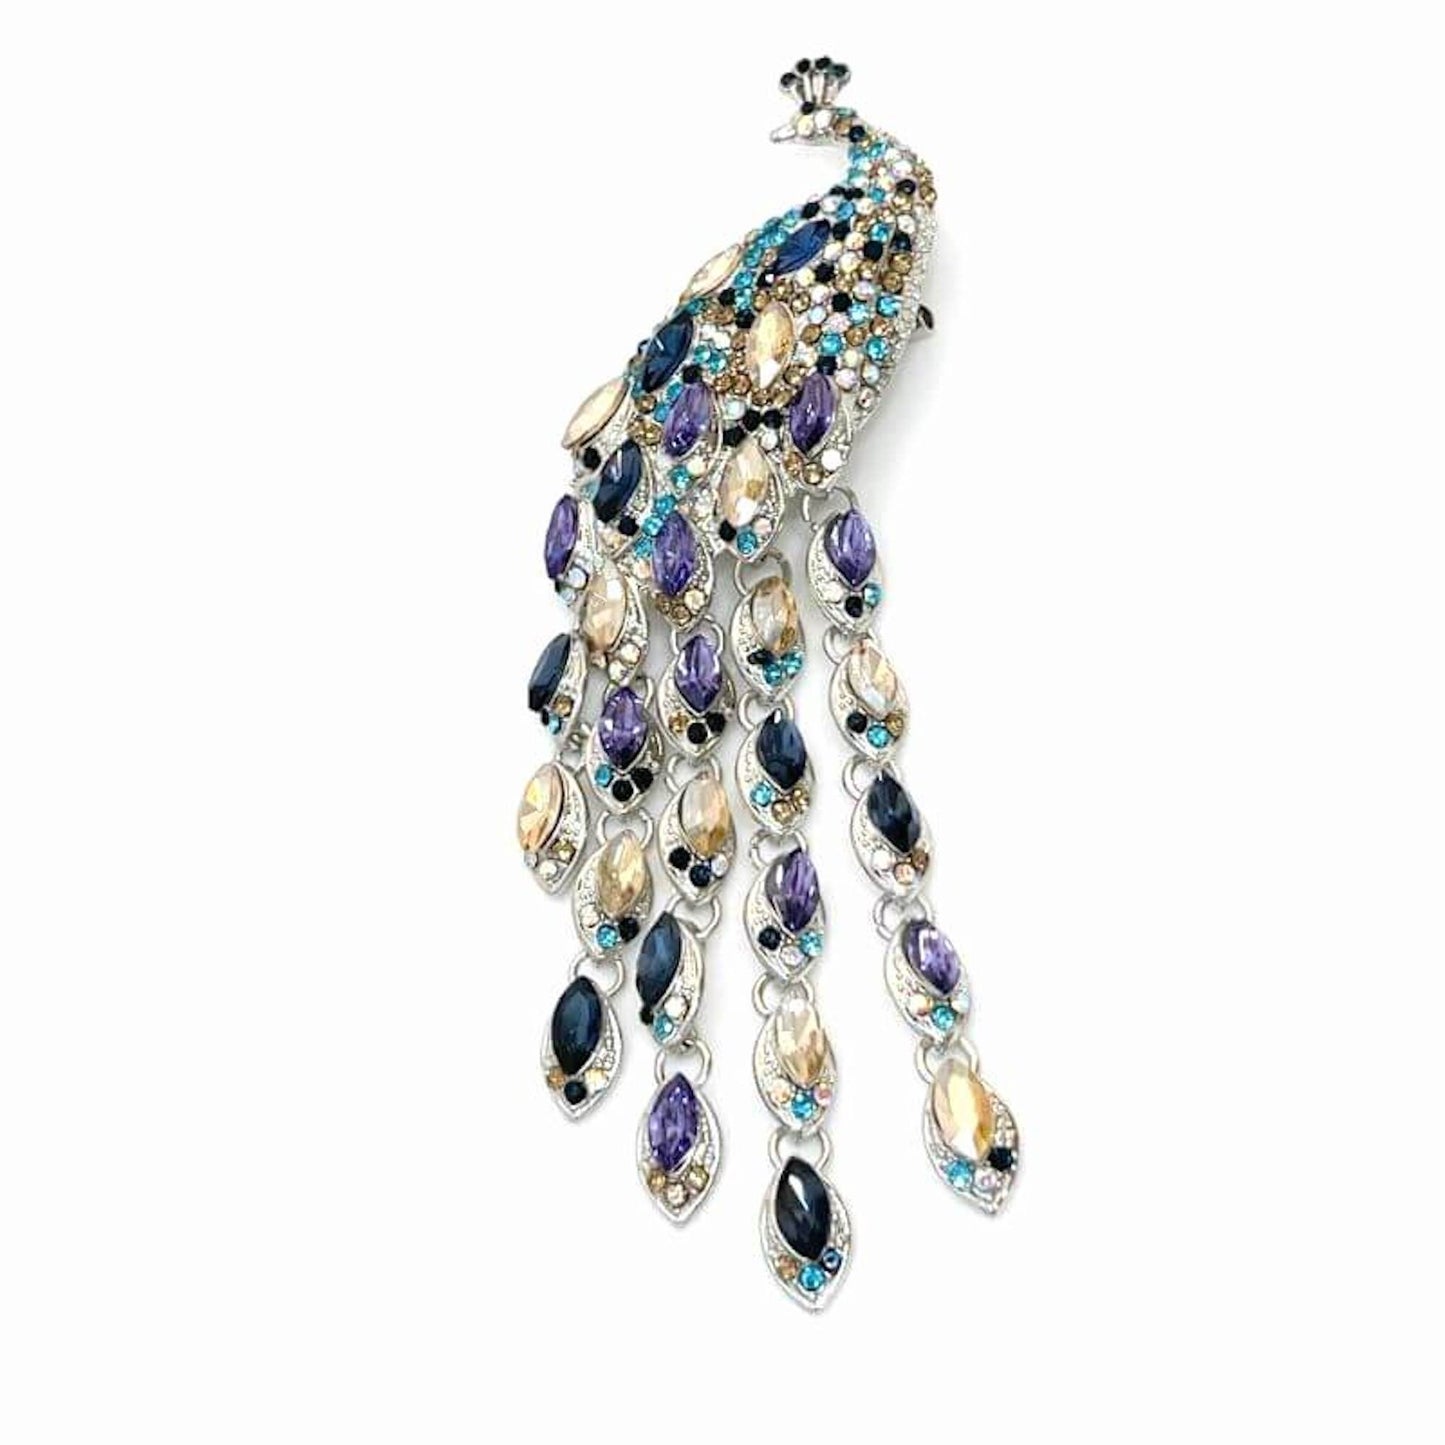 Stunning Crystal Peacock Brooch, Statement Fashion Brooch, Tassel Peacock Pin, Extra Long Luxury Peacock Pin, Brooches for Women